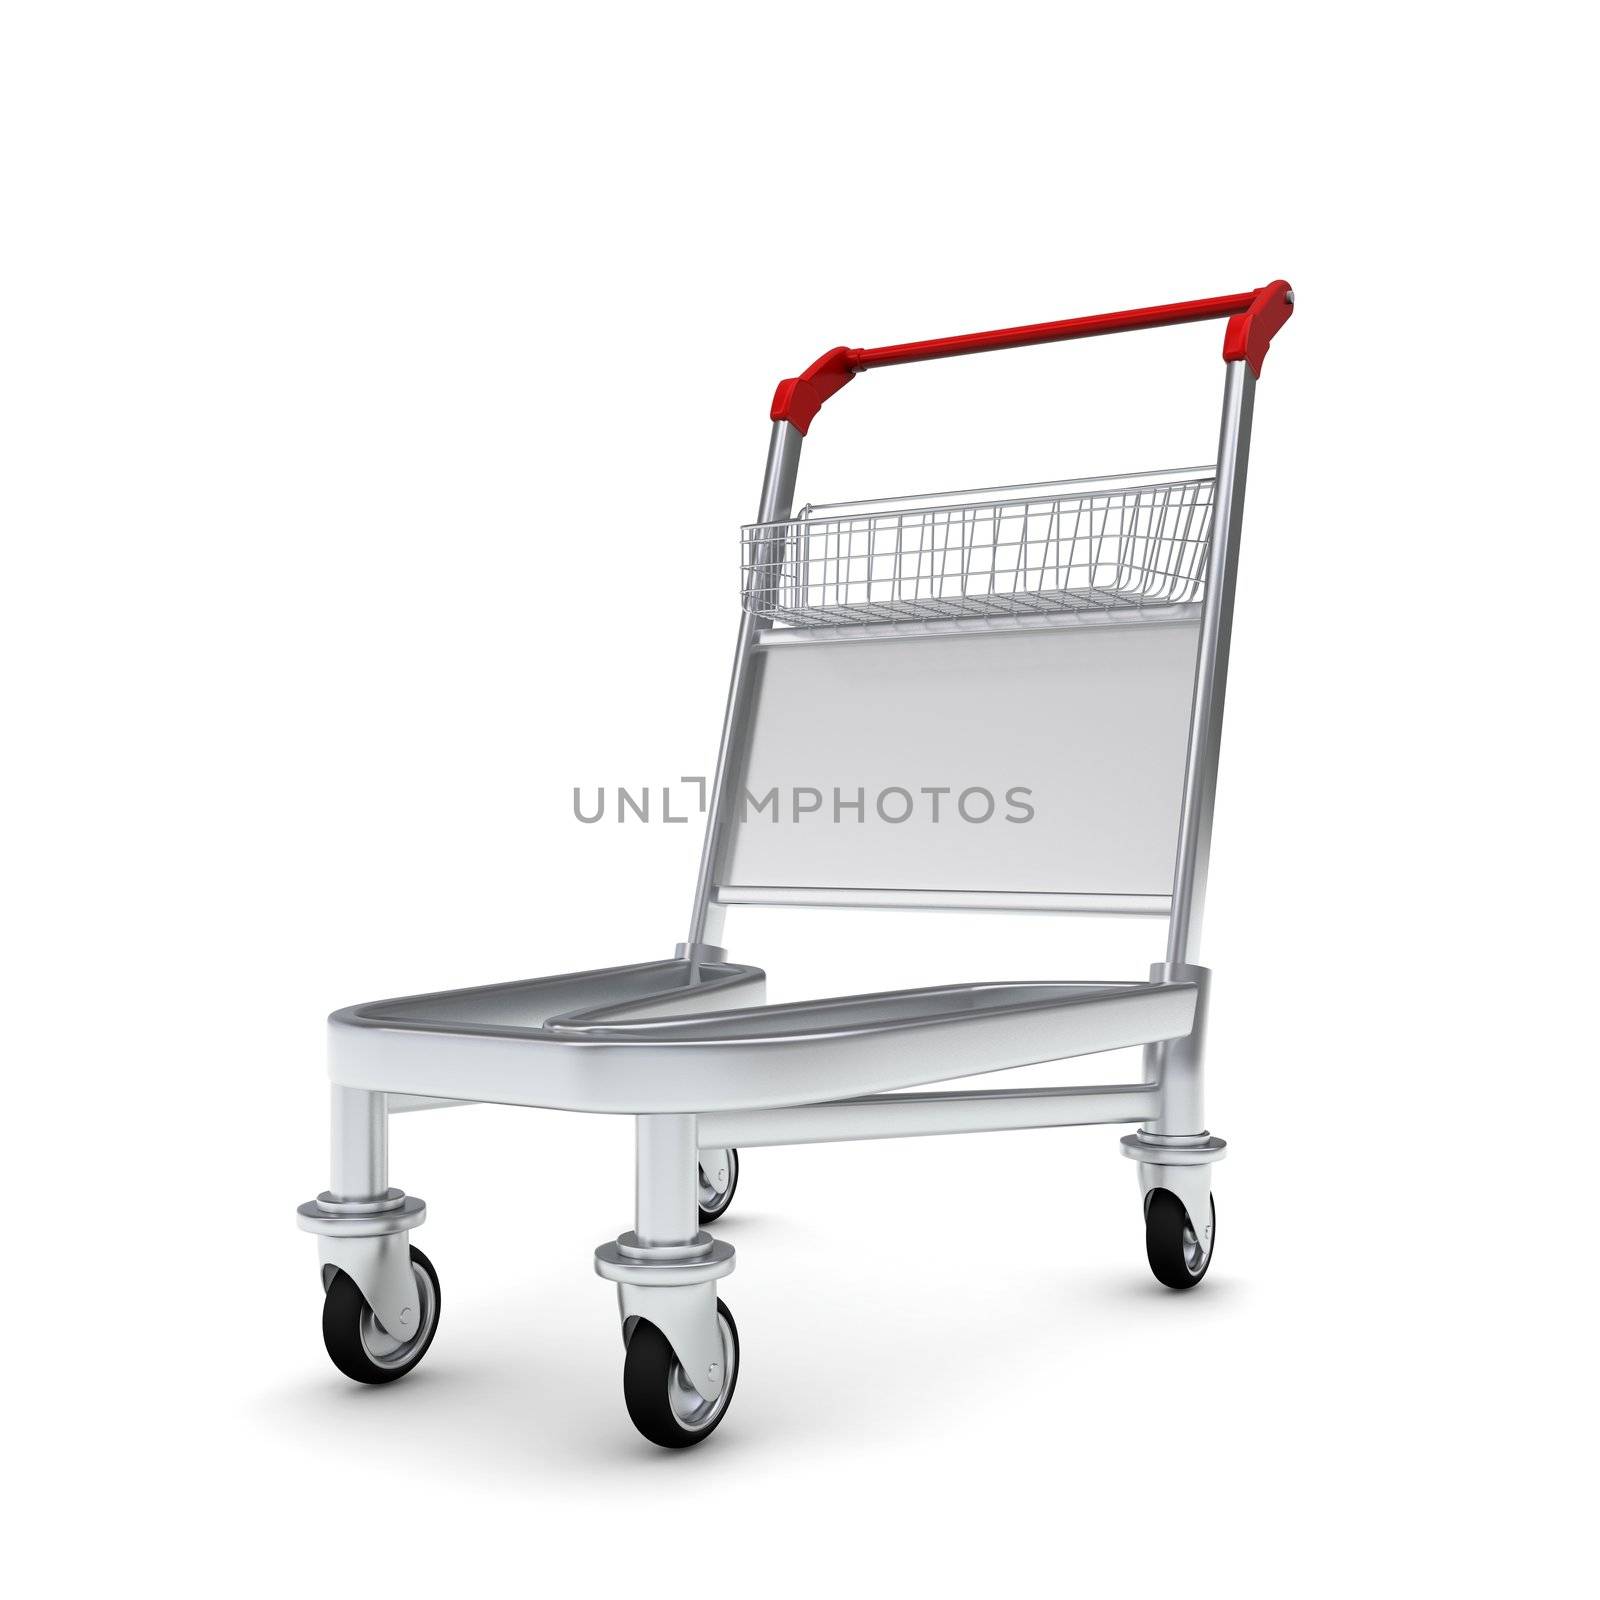 Trolley for luggage at the airport. Isolated on white background